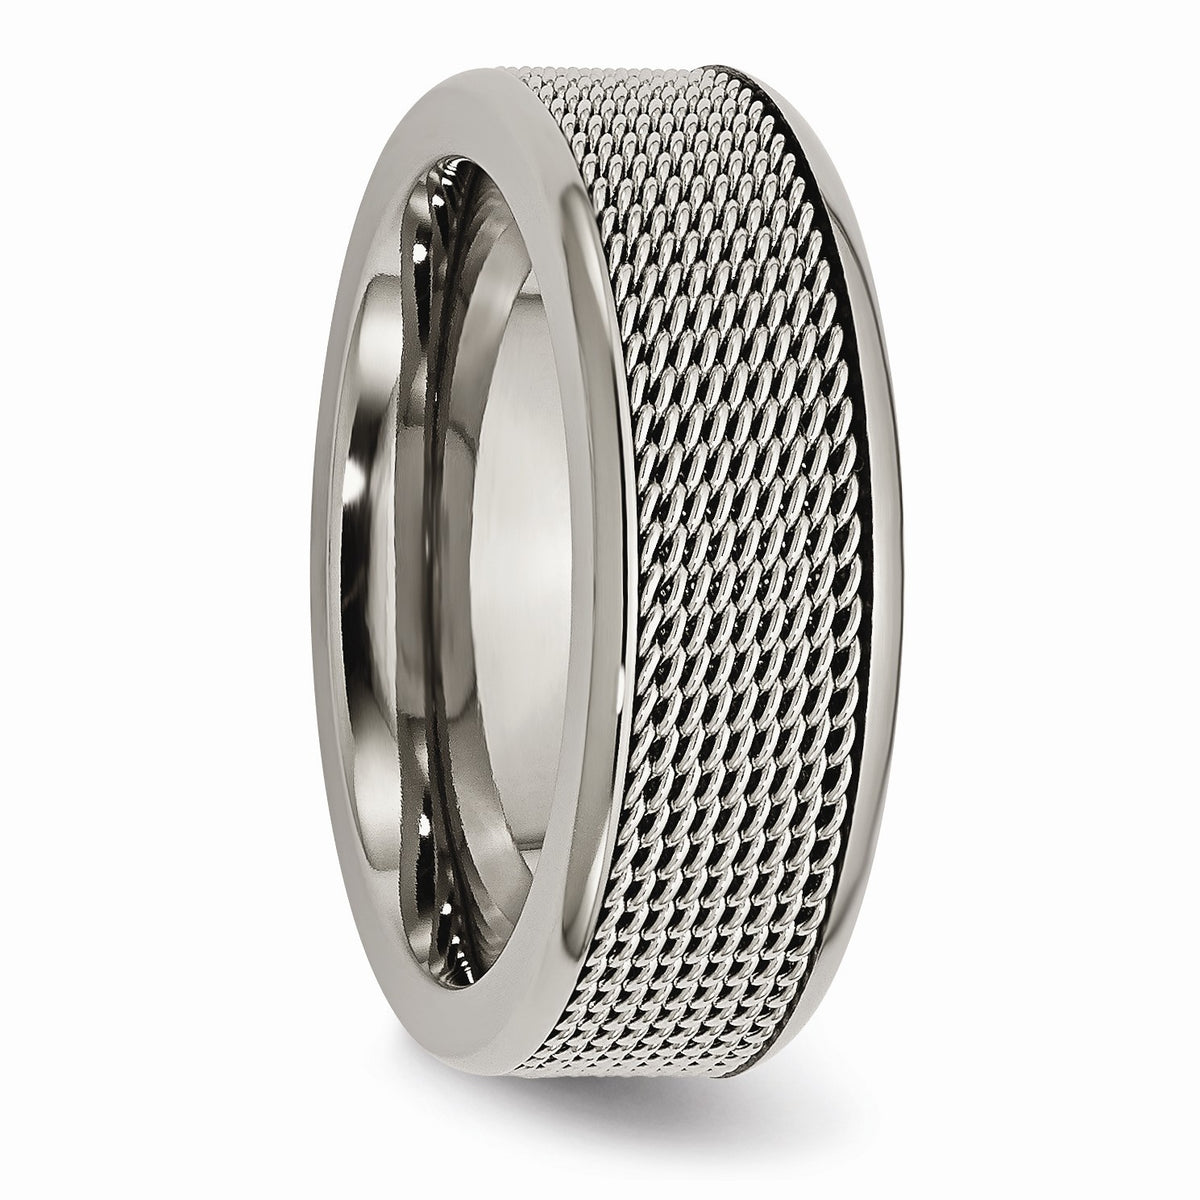 Alternate view of the 8mm Titanium and Stainless Steel Polished Mesh Band by The Black Bow Jewelry Co.